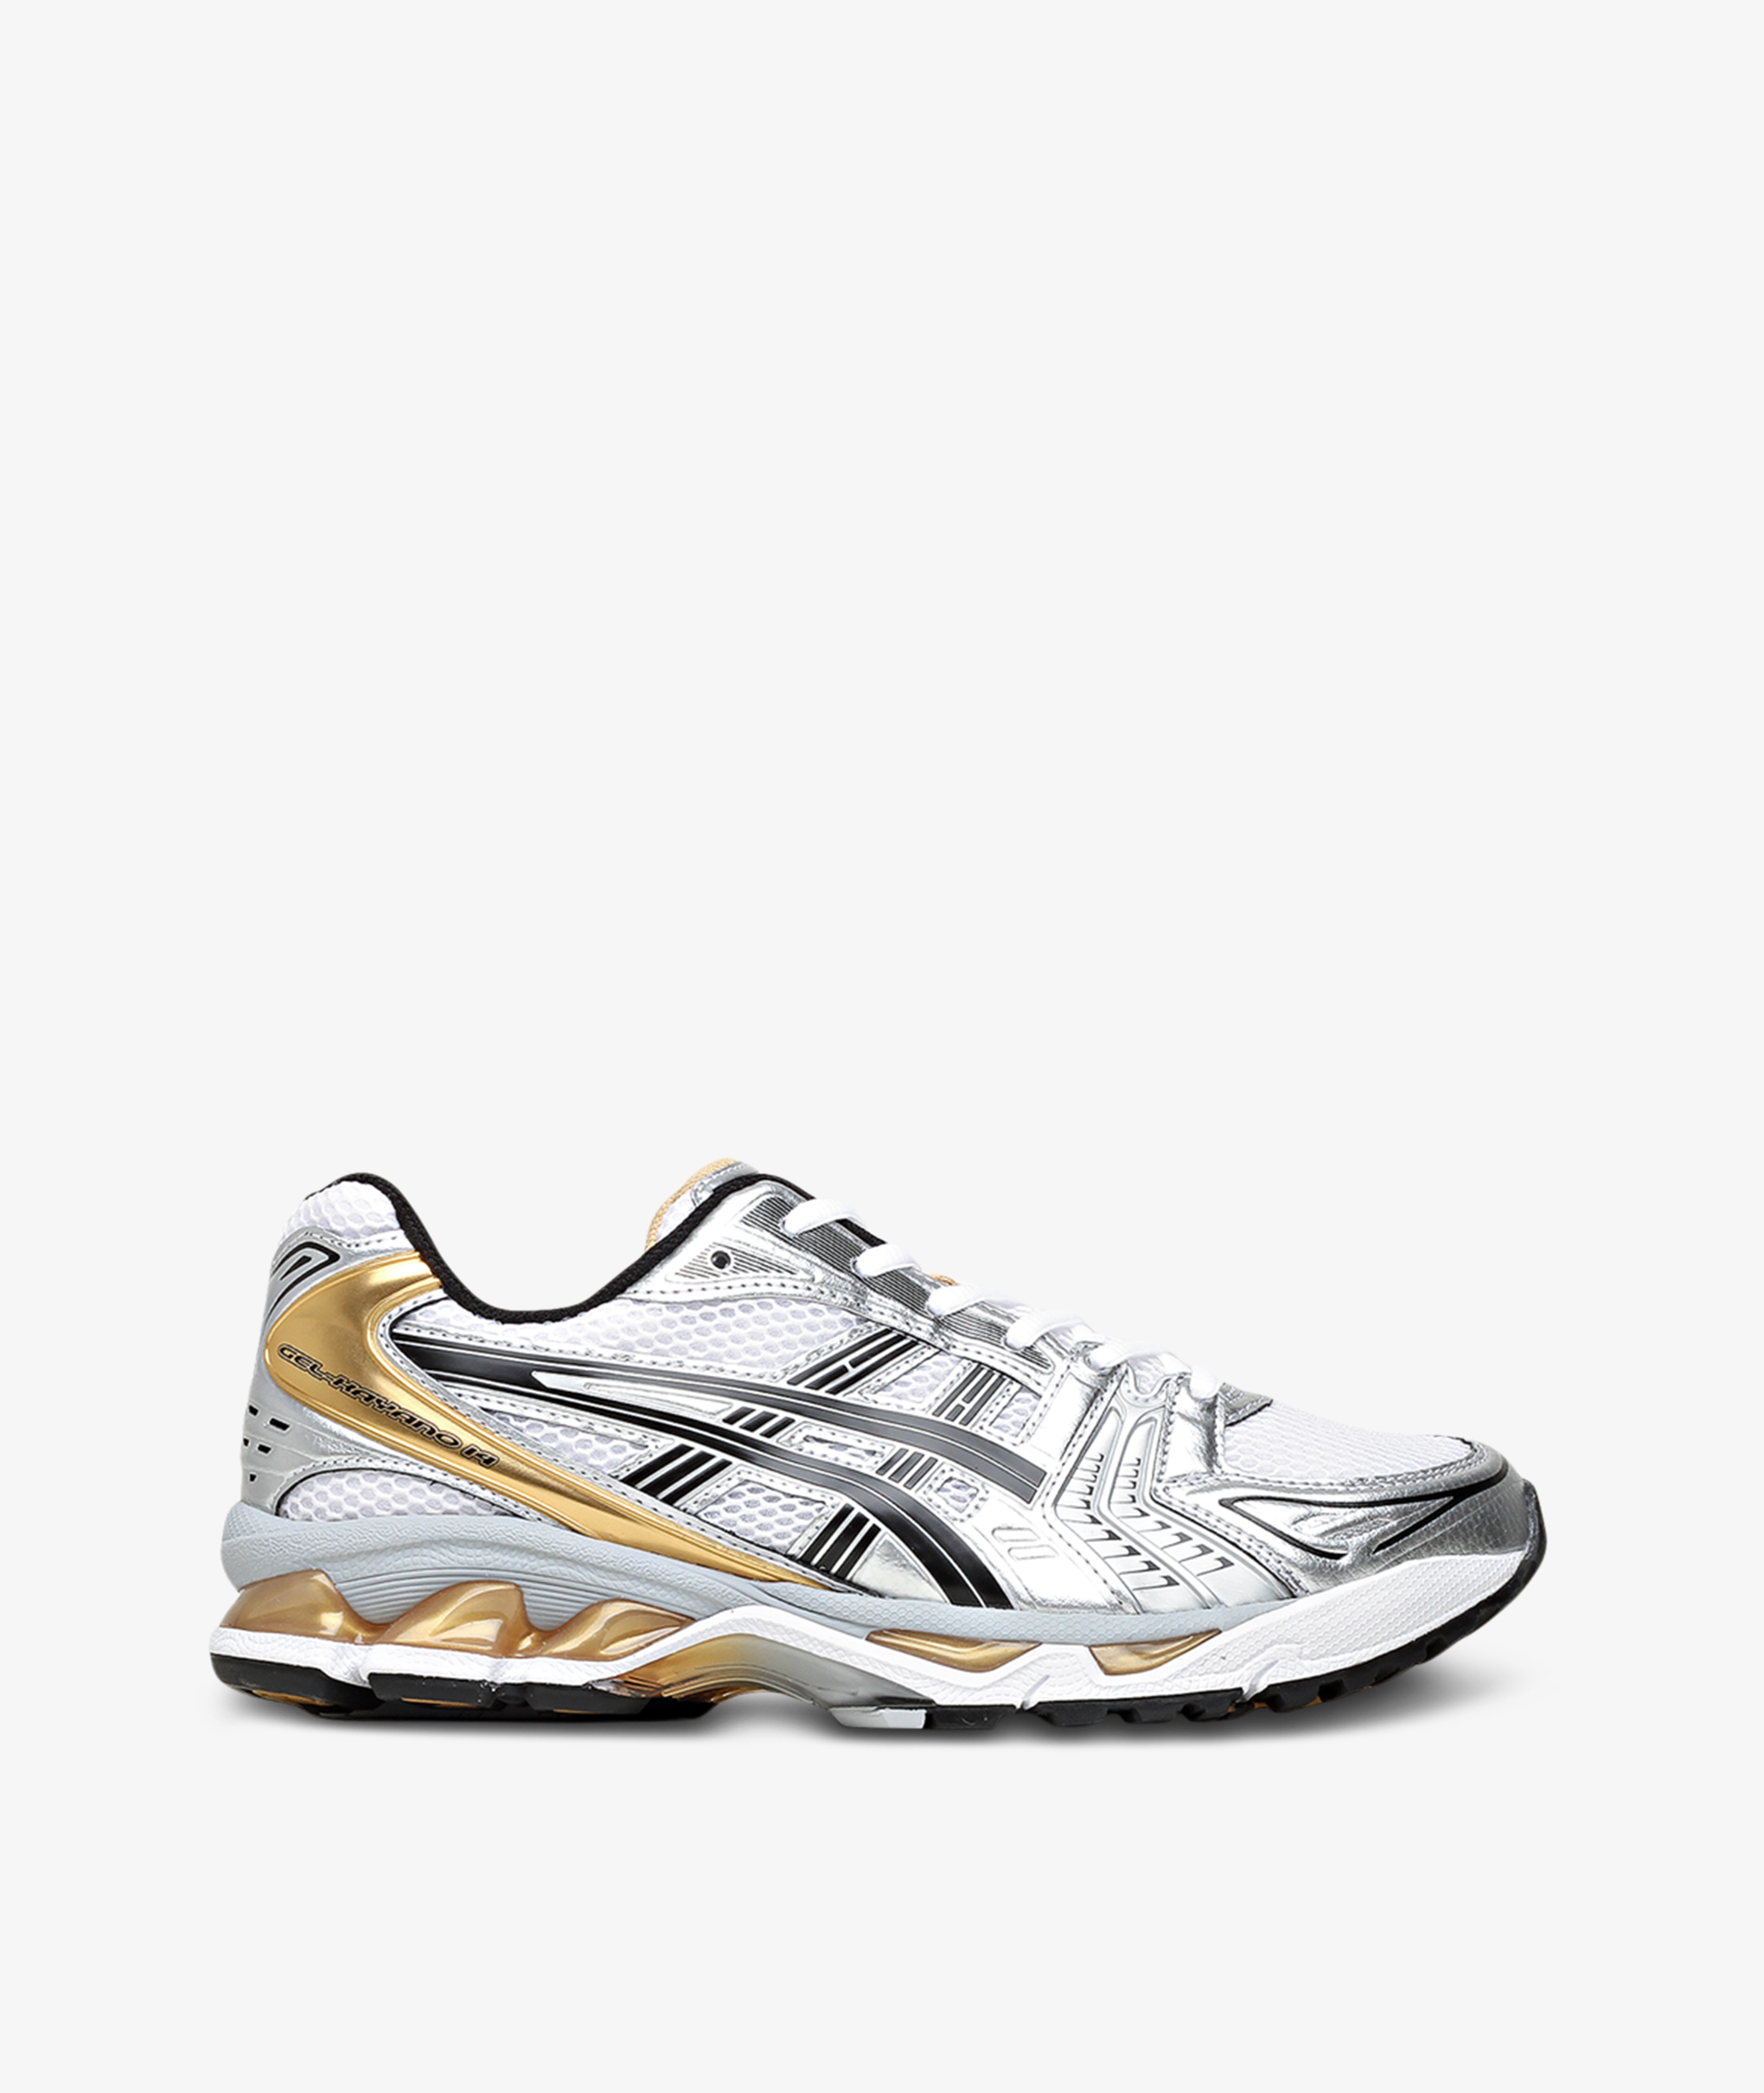 Asics shoes Gel-Kayano 14 white color 1201A019